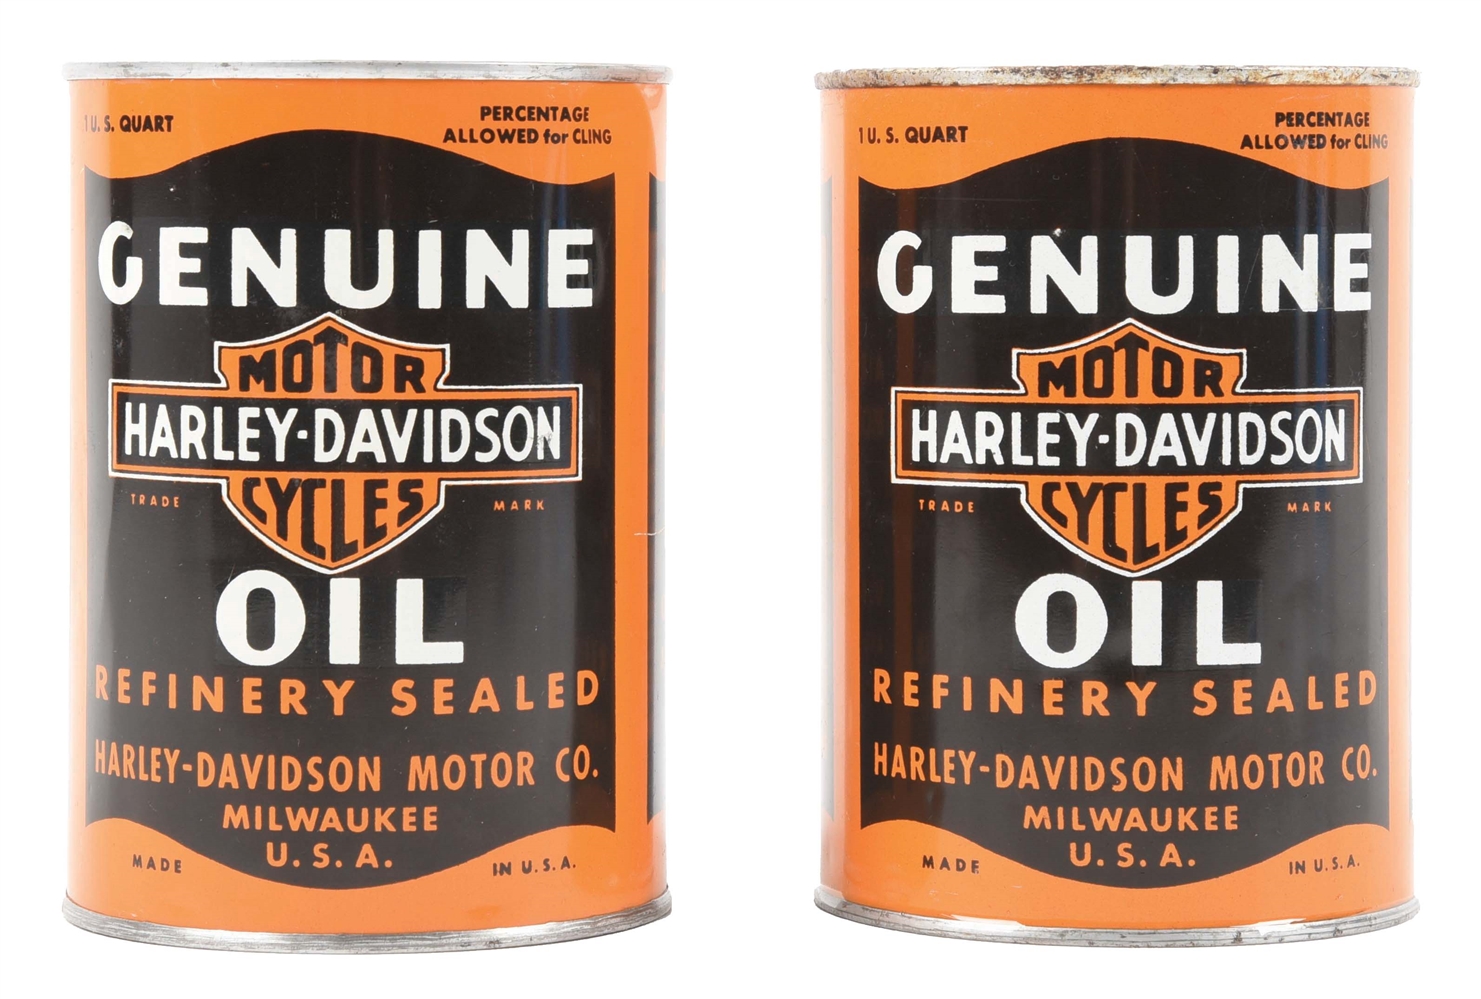 COLLECTION OF 2: NOS HARLEY-DAVIDSON MOTORCYCLES GENUINE OIL 1 QT. CANS.